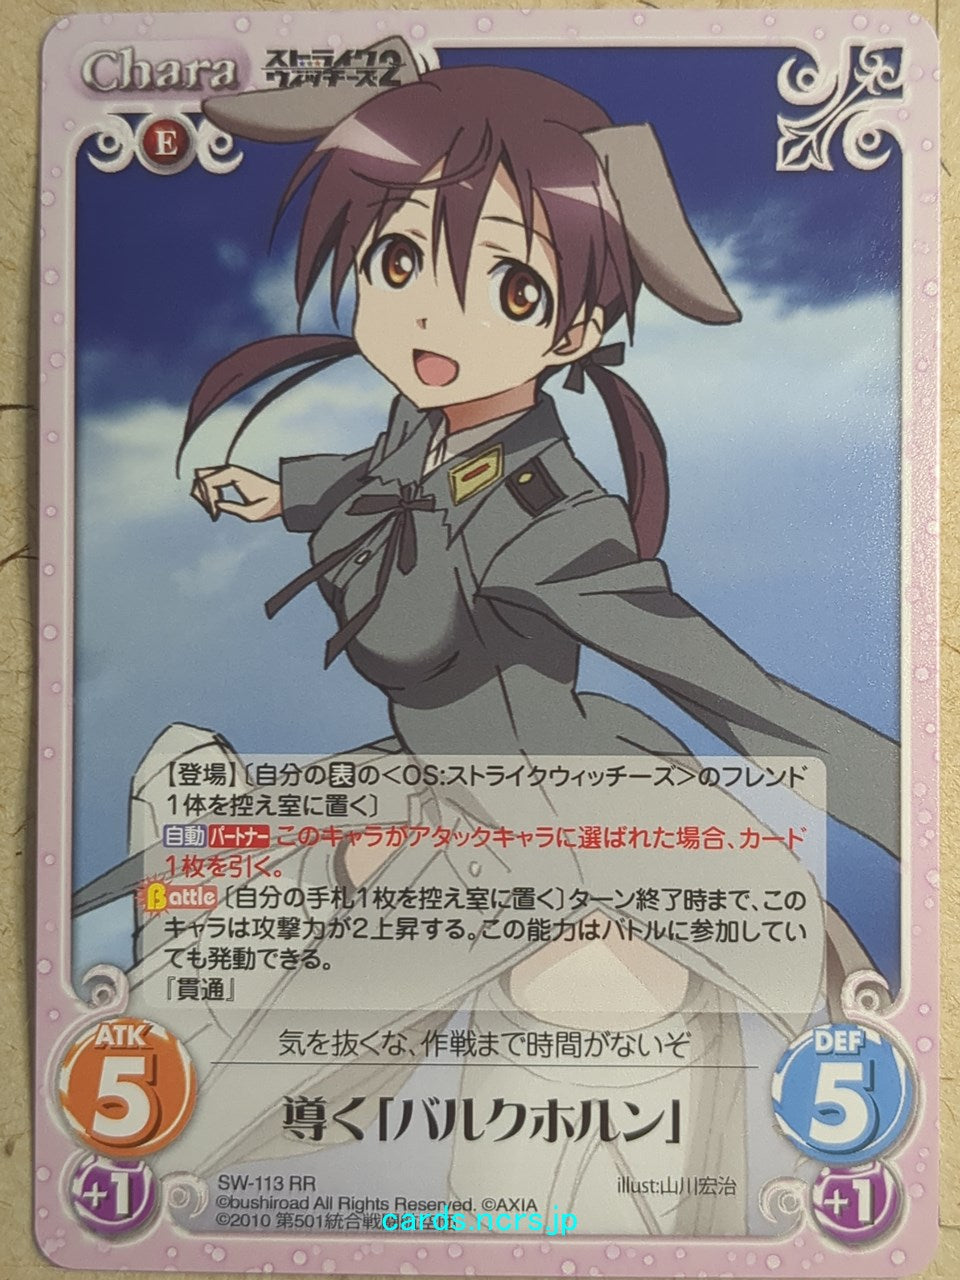 Chaos Strike Witches -Christiane Barkhorn-   Trading Card CH/SW-113RR